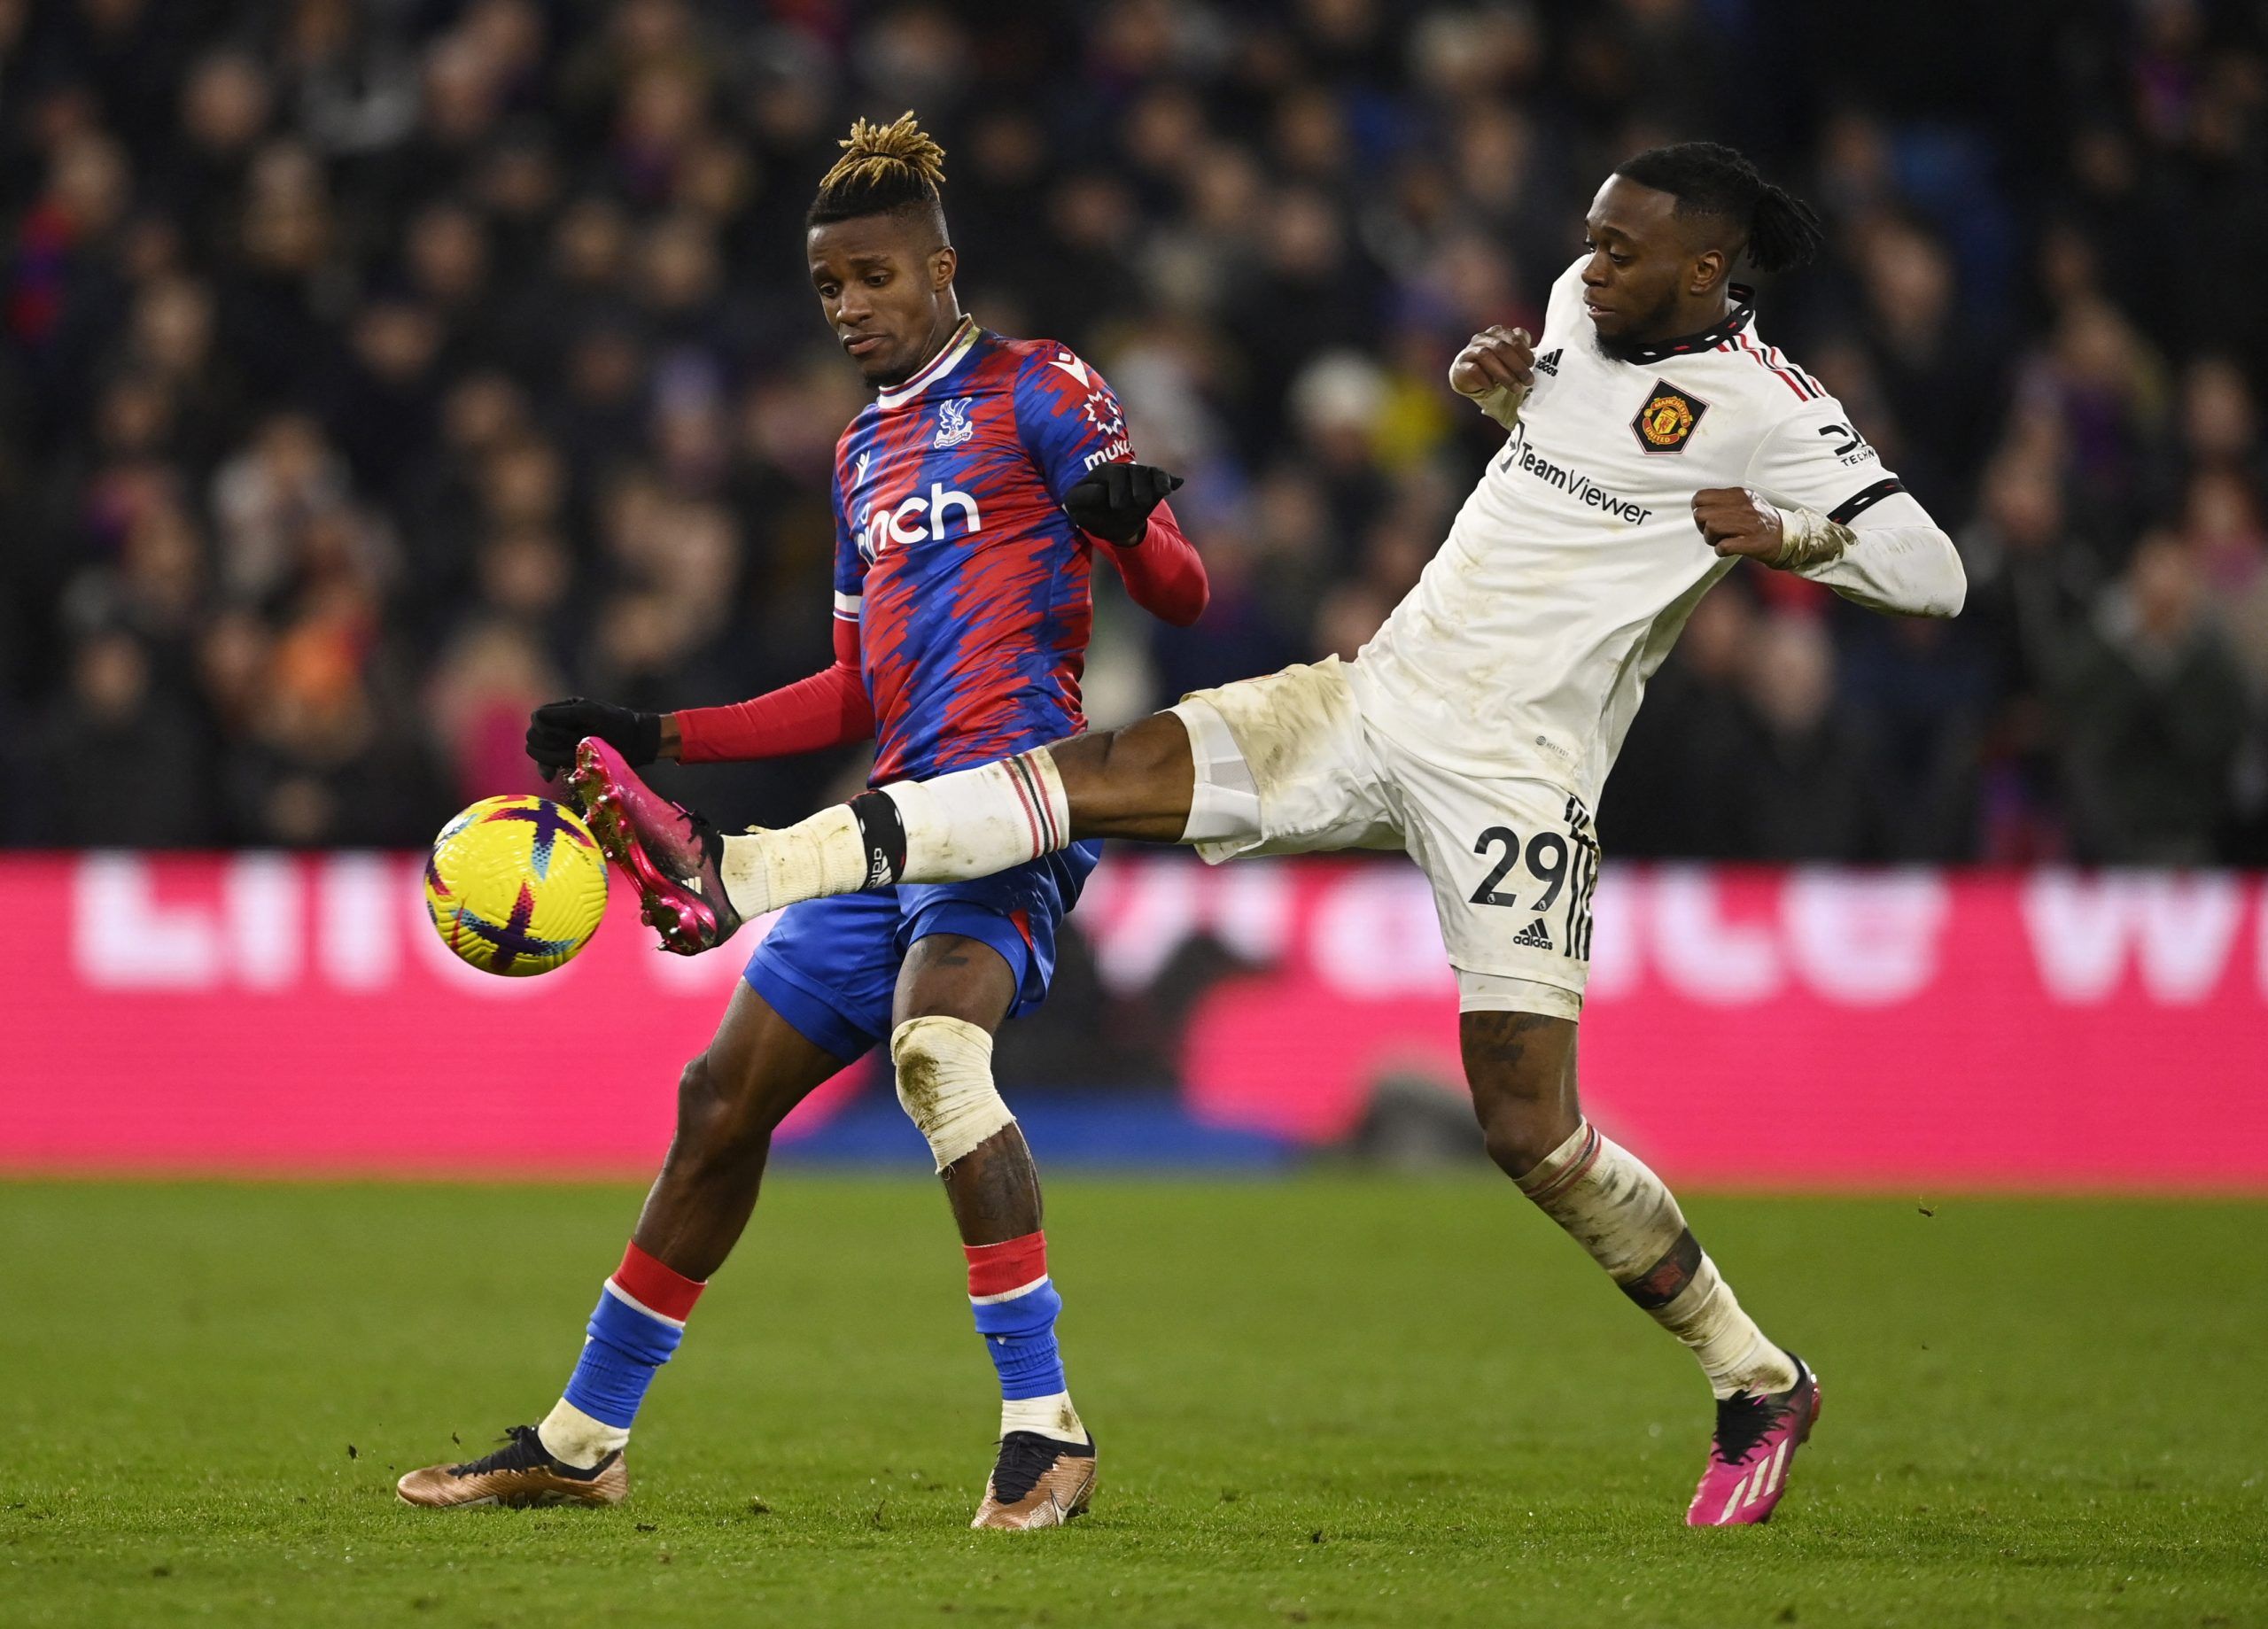 Soccer Football - Premier League - Crystal Palace v Manchester United - Selhurst Park, London, Britain - January 18, 2023 Crystal Palace's Wilfried Zaha in action with Manchester United's Aaron Wan-Bissaka REUTERS/Tony Obrien EDITORIAL USE ONLY. No use with unauthorized audio, video, data, fixture lists, club/league logos or 'live' services. Online in-match use limited to 75 images, no video emulation. No use in betting, games or single club /league/player publications.  Please contact your acco